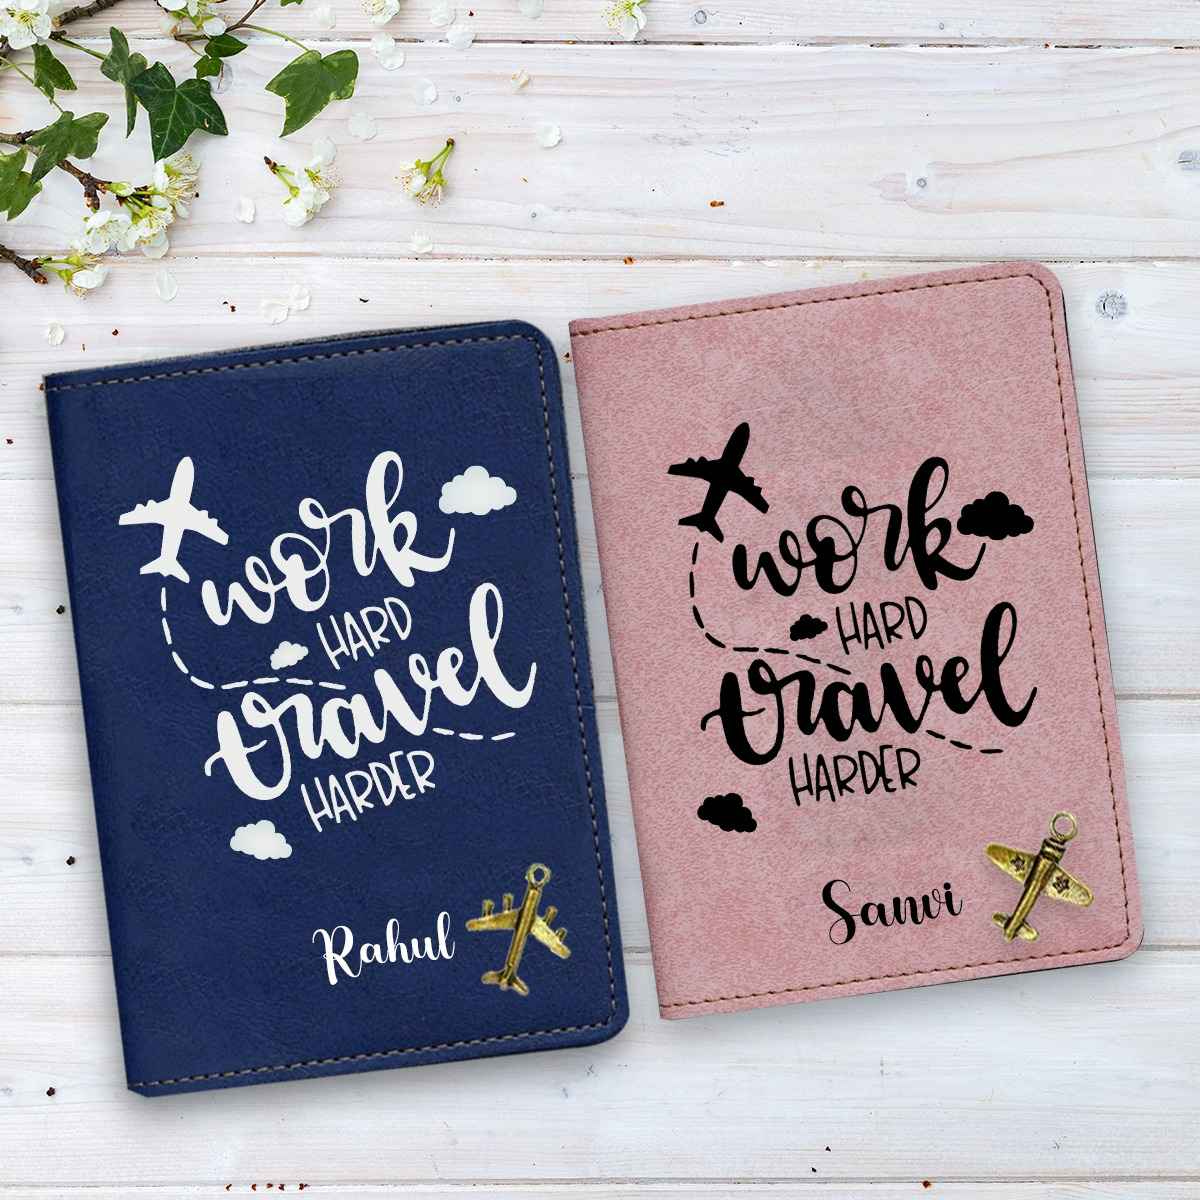 Personalized Passport Holder with Name and Charm